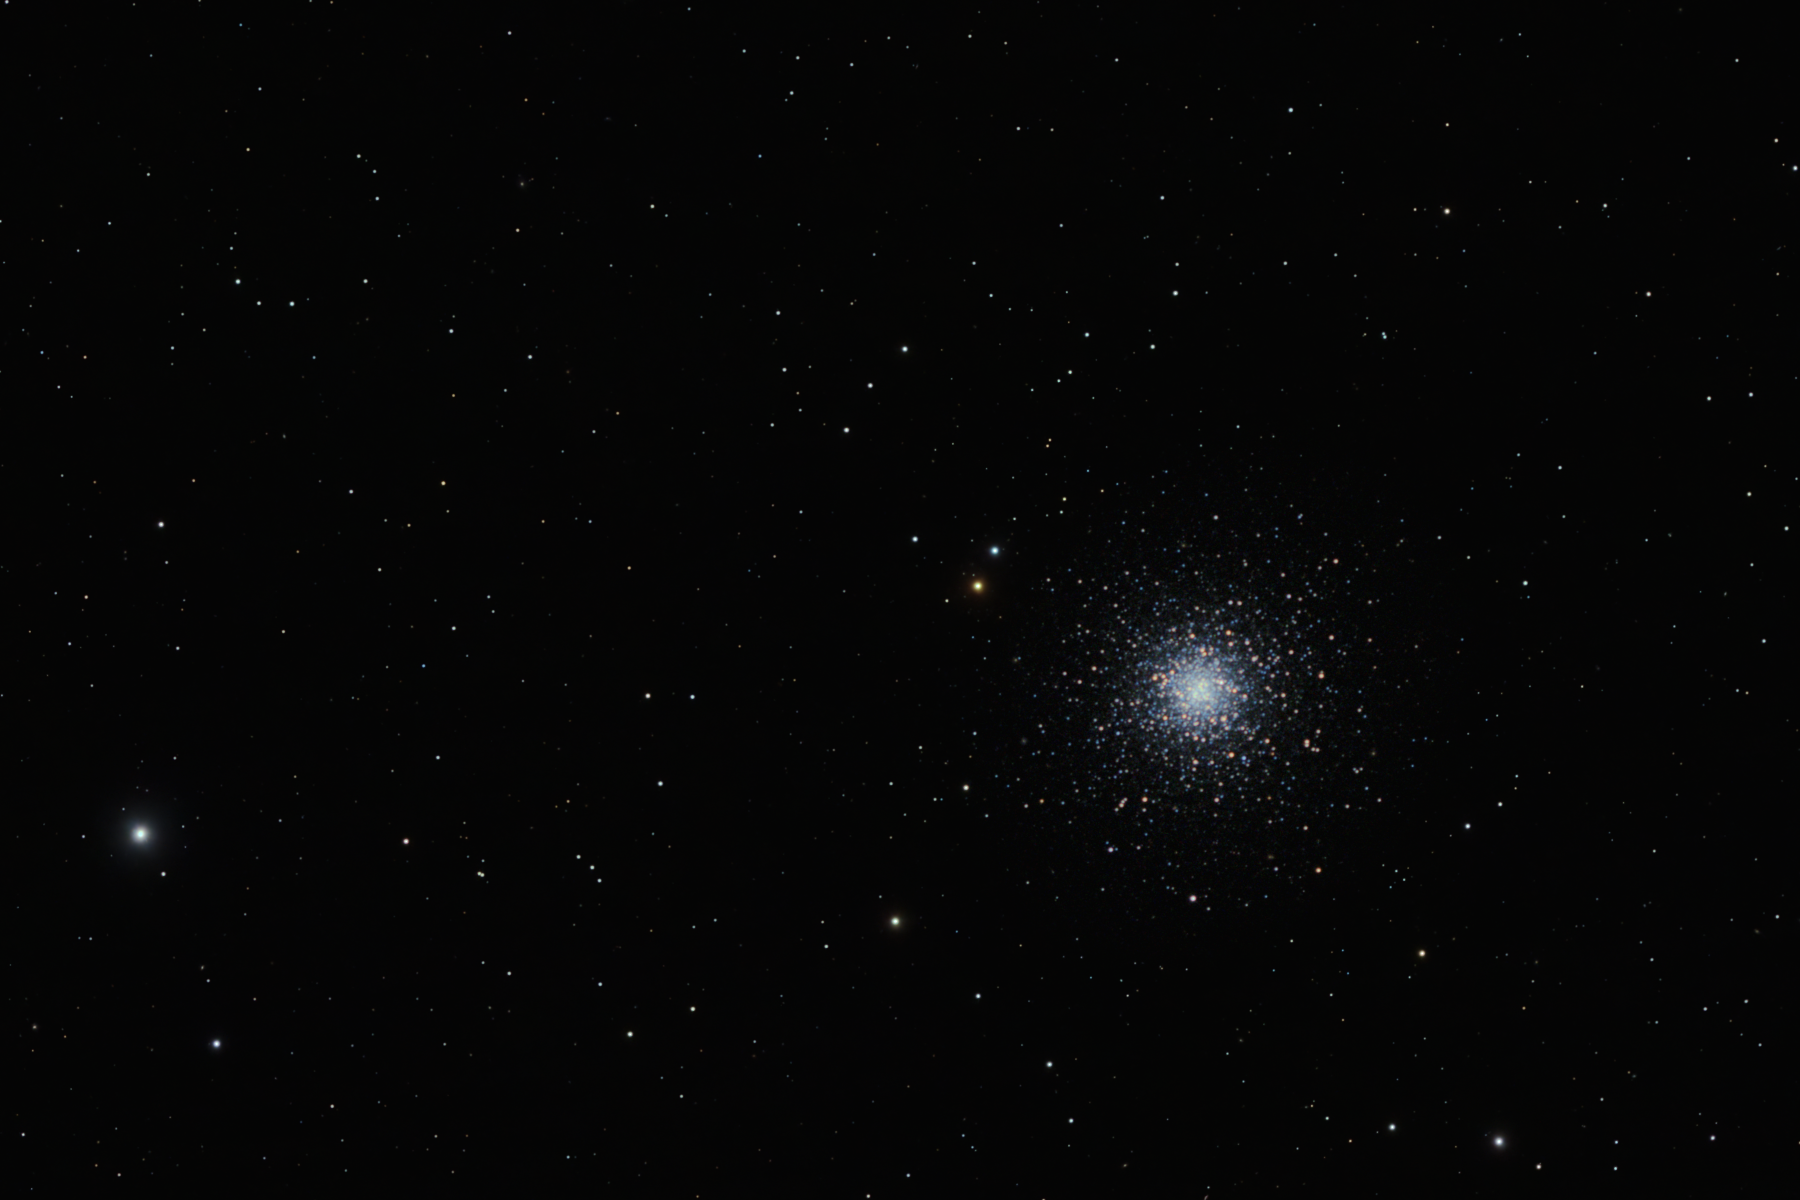 NGC 5024 in Coma Berenices, M53